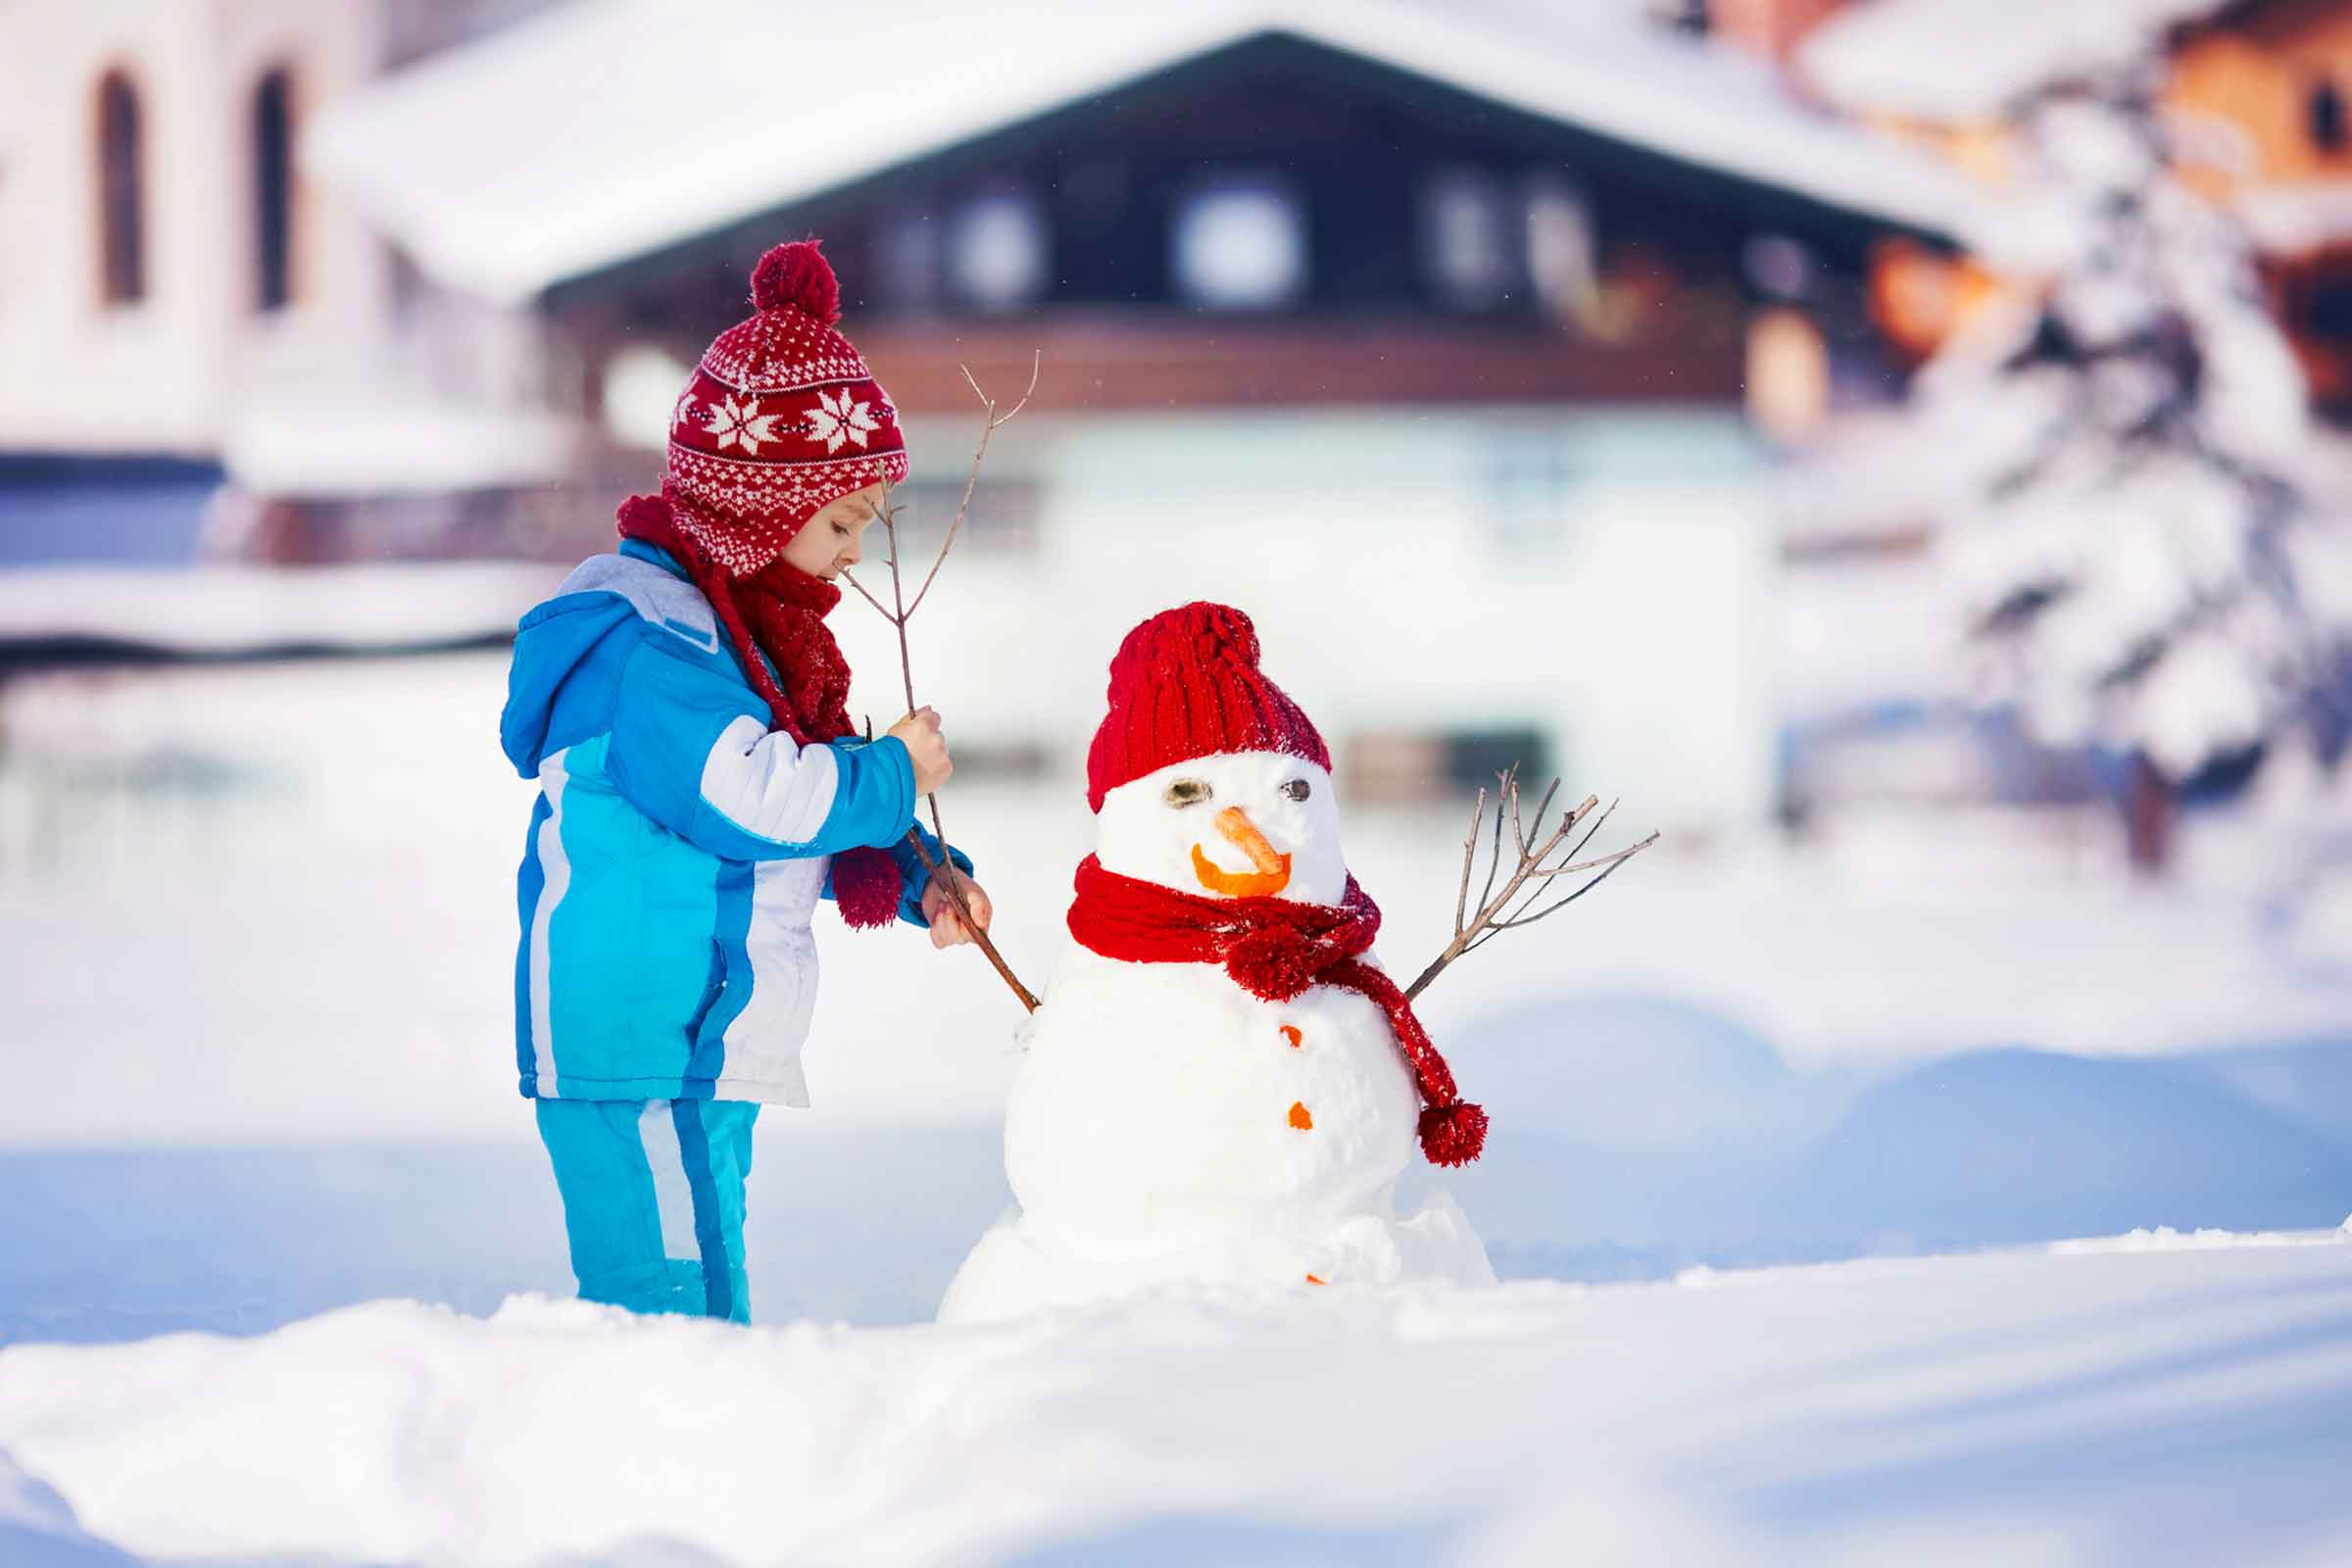 How to Build the Perfect Snowman: 6 Tips | Reader's Digest